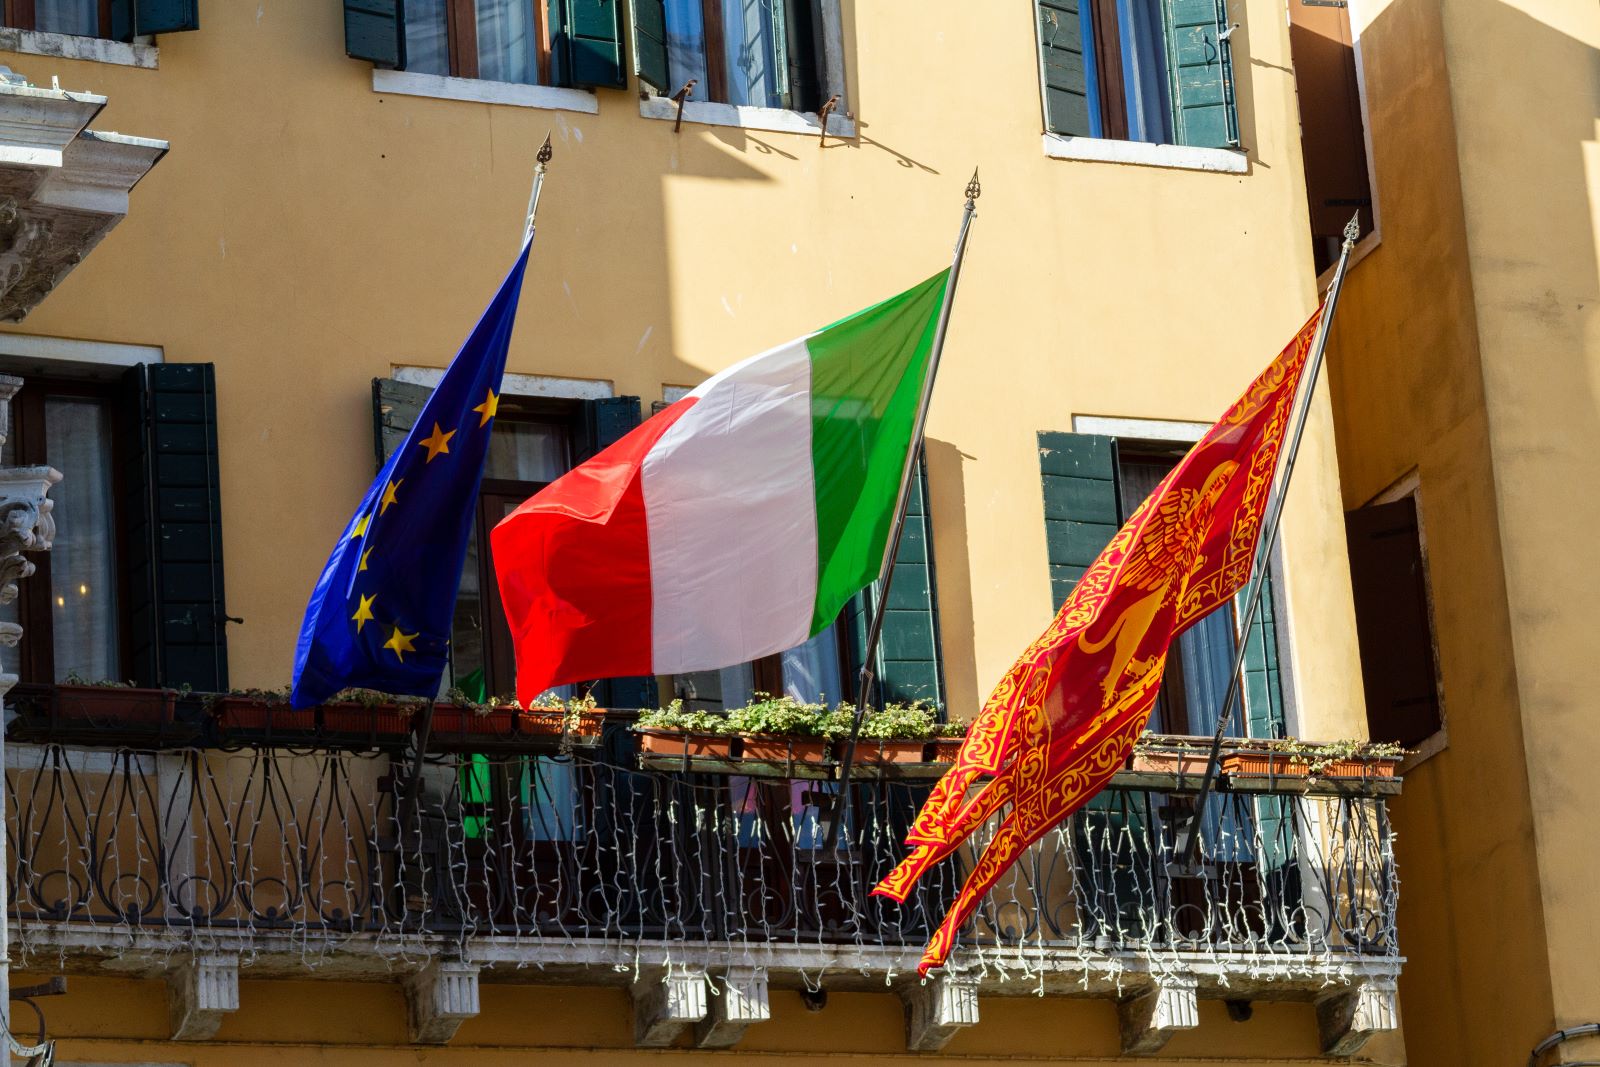 Image Credit: Shutterstock / Adam Jan Figel <p><span>Among its critics is former mayor of Venice, Massimo Cacciari, who called the entrance fee “absurd” and encouraged visitors not to pay it on the basis that tourists already “pay for everything” in a public statement.</span></p>